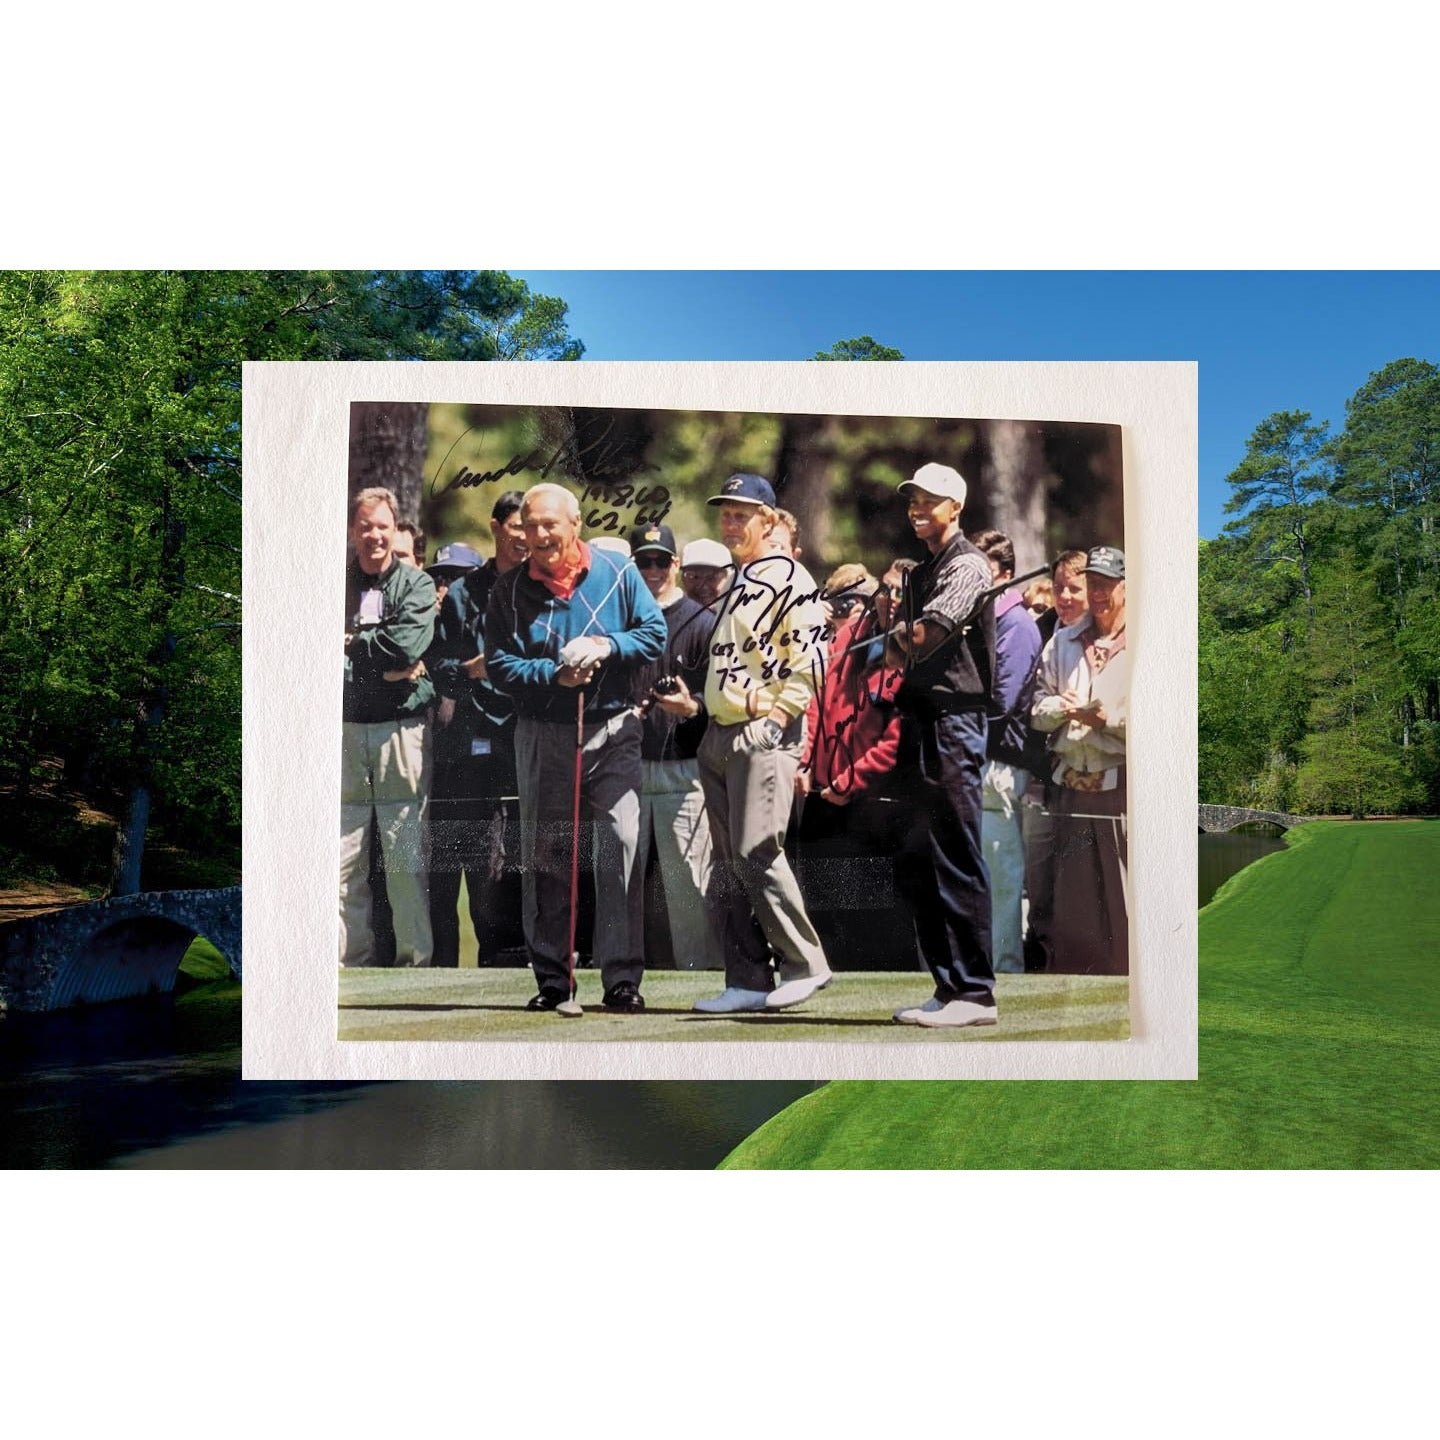 Tiger Woods Arnold Palmer Jack Nicklaus 8x10 photo signed with proof